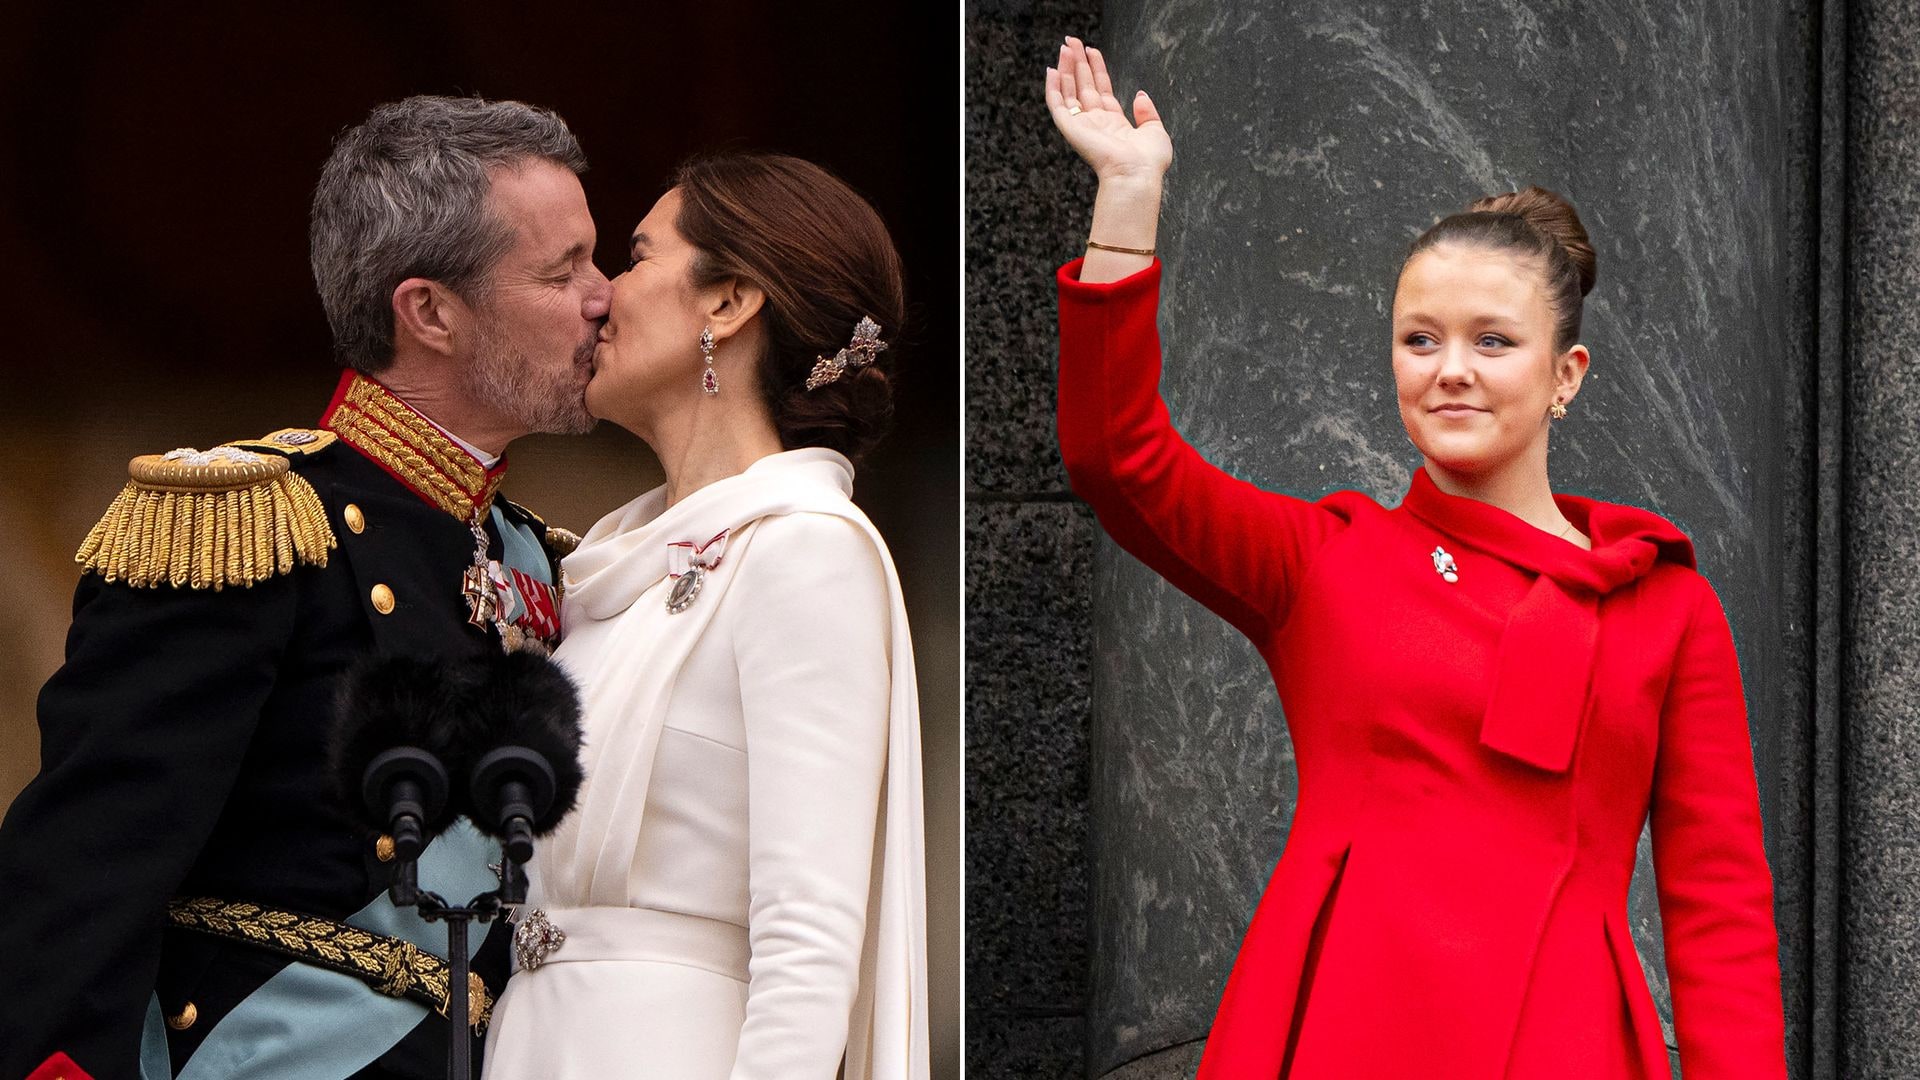 Princess Isabella's reaction to her parents' kiss was captured on camera